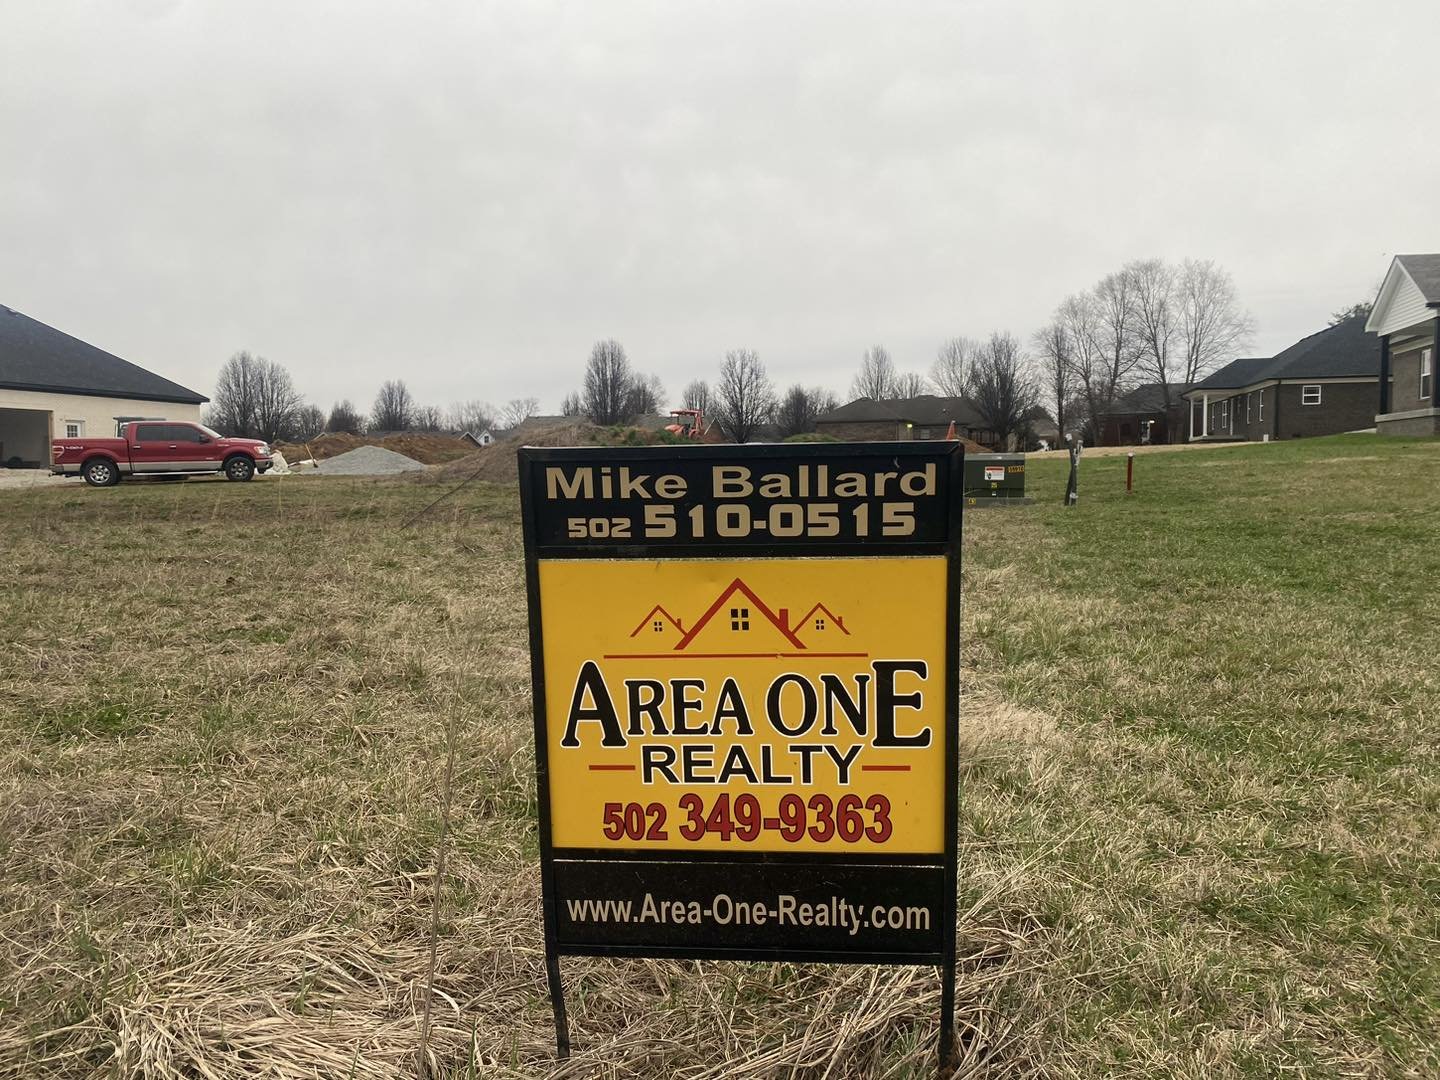 🌸🪻Spring into building your forever home 🏡 on this WONDERFUL Lot🪻🌸

Are you in the market to build a home 🏡 ? If so look no further!  Check out Area One Realty&rsquo;s great listing at 1360 Woodlawn Rd in historic Bardstown, Ky offered by Mike 